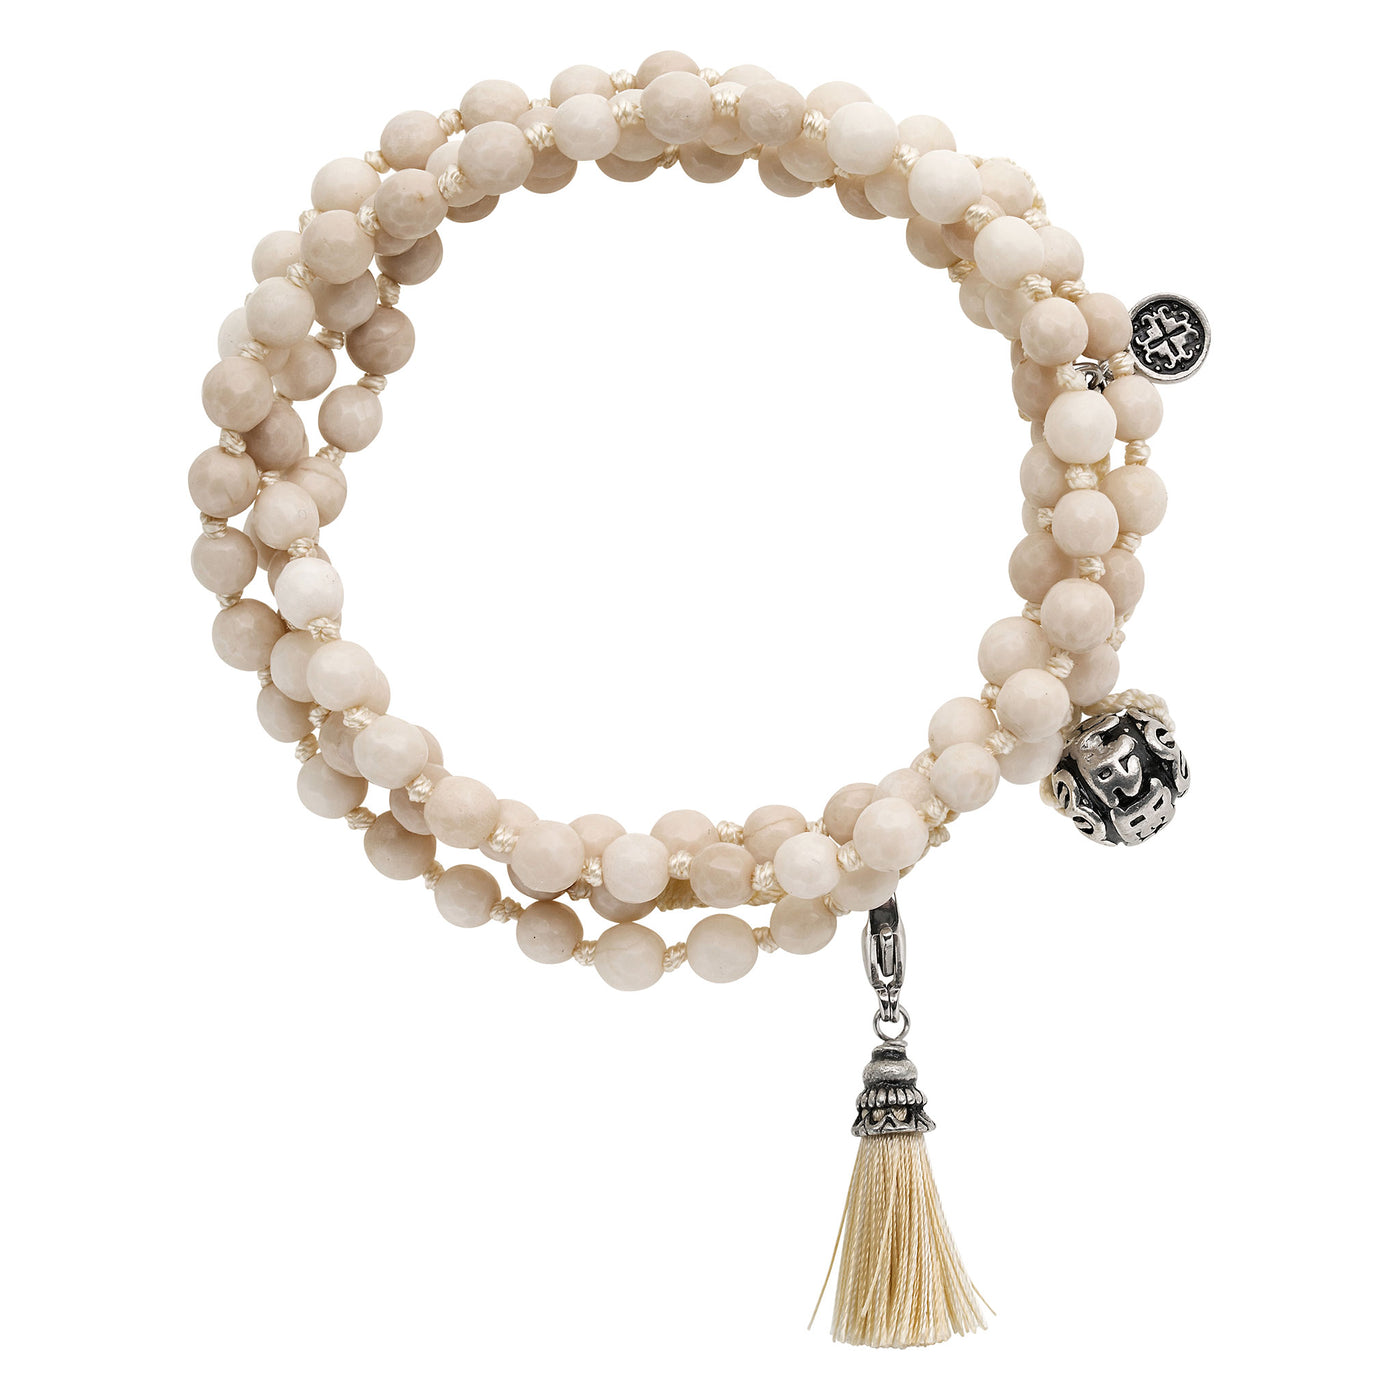 GROWTH: Riverstone Faceted 108 Bead Adjustable Wrap Mala